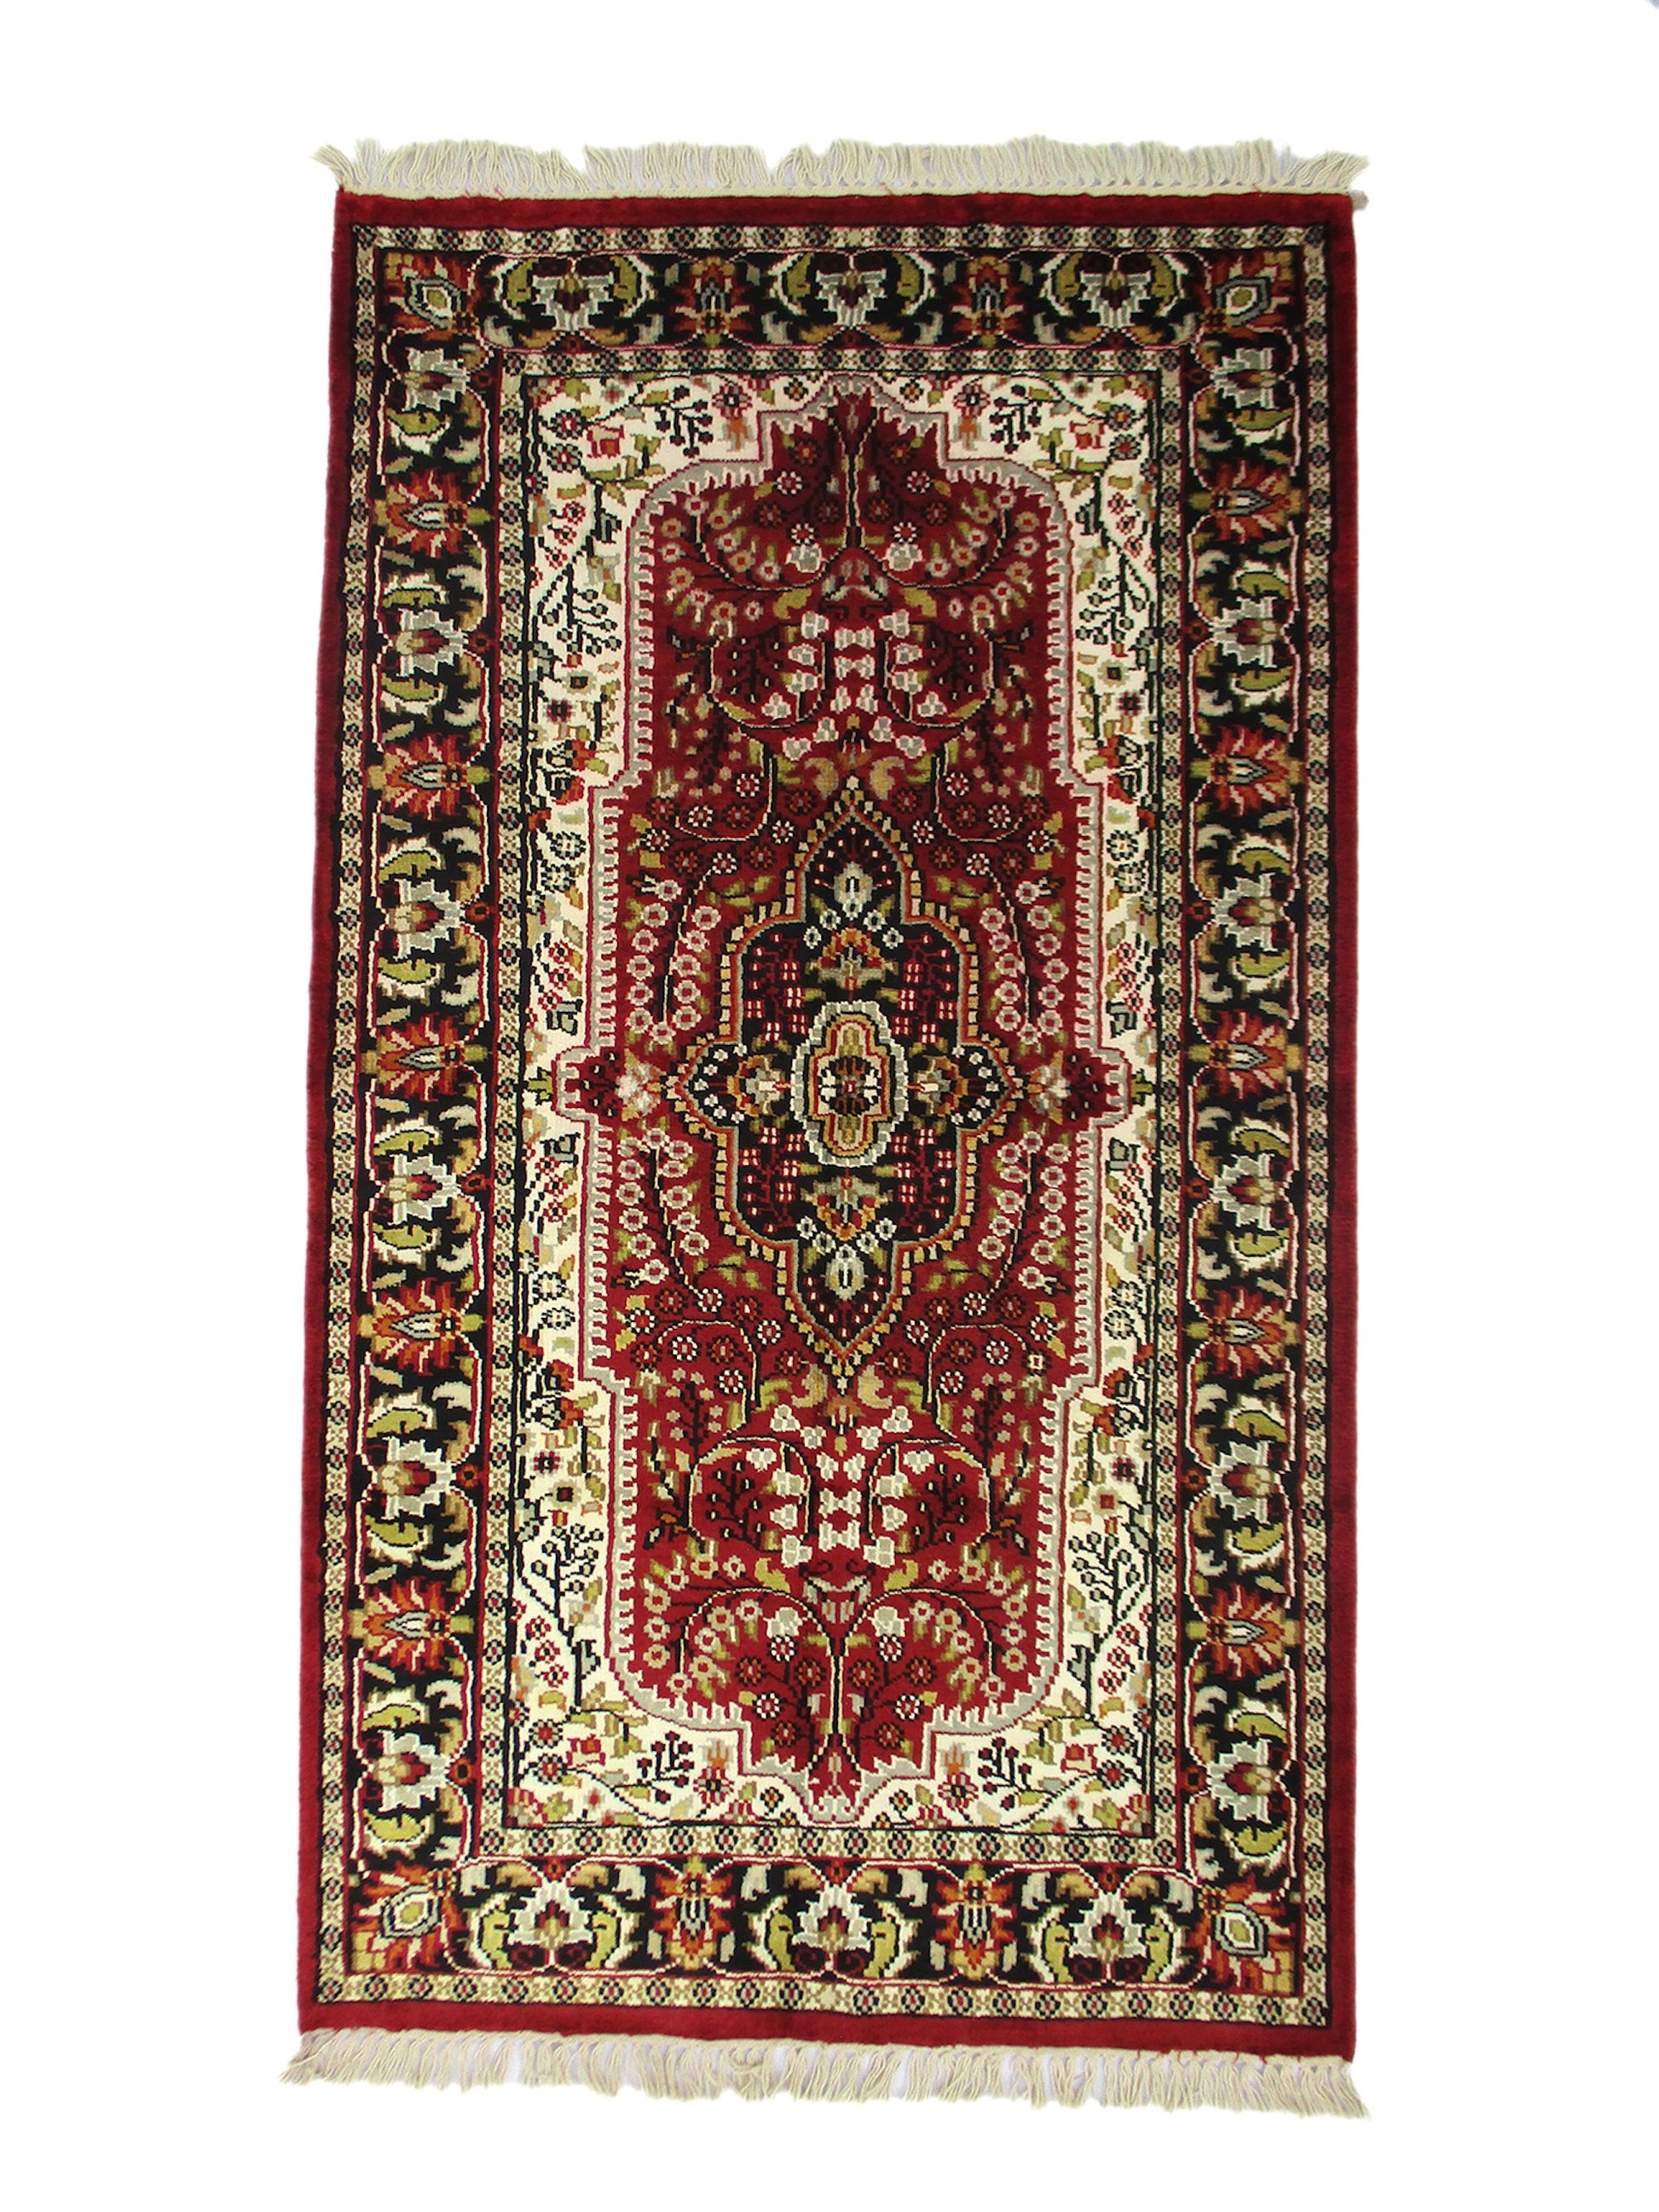 One of a kind Red Black Antique Rug | Small Persian Caucasian Rug | Living Room Rug | Accent Hand Woven Rug | Oriental Geometric Pattern Rug